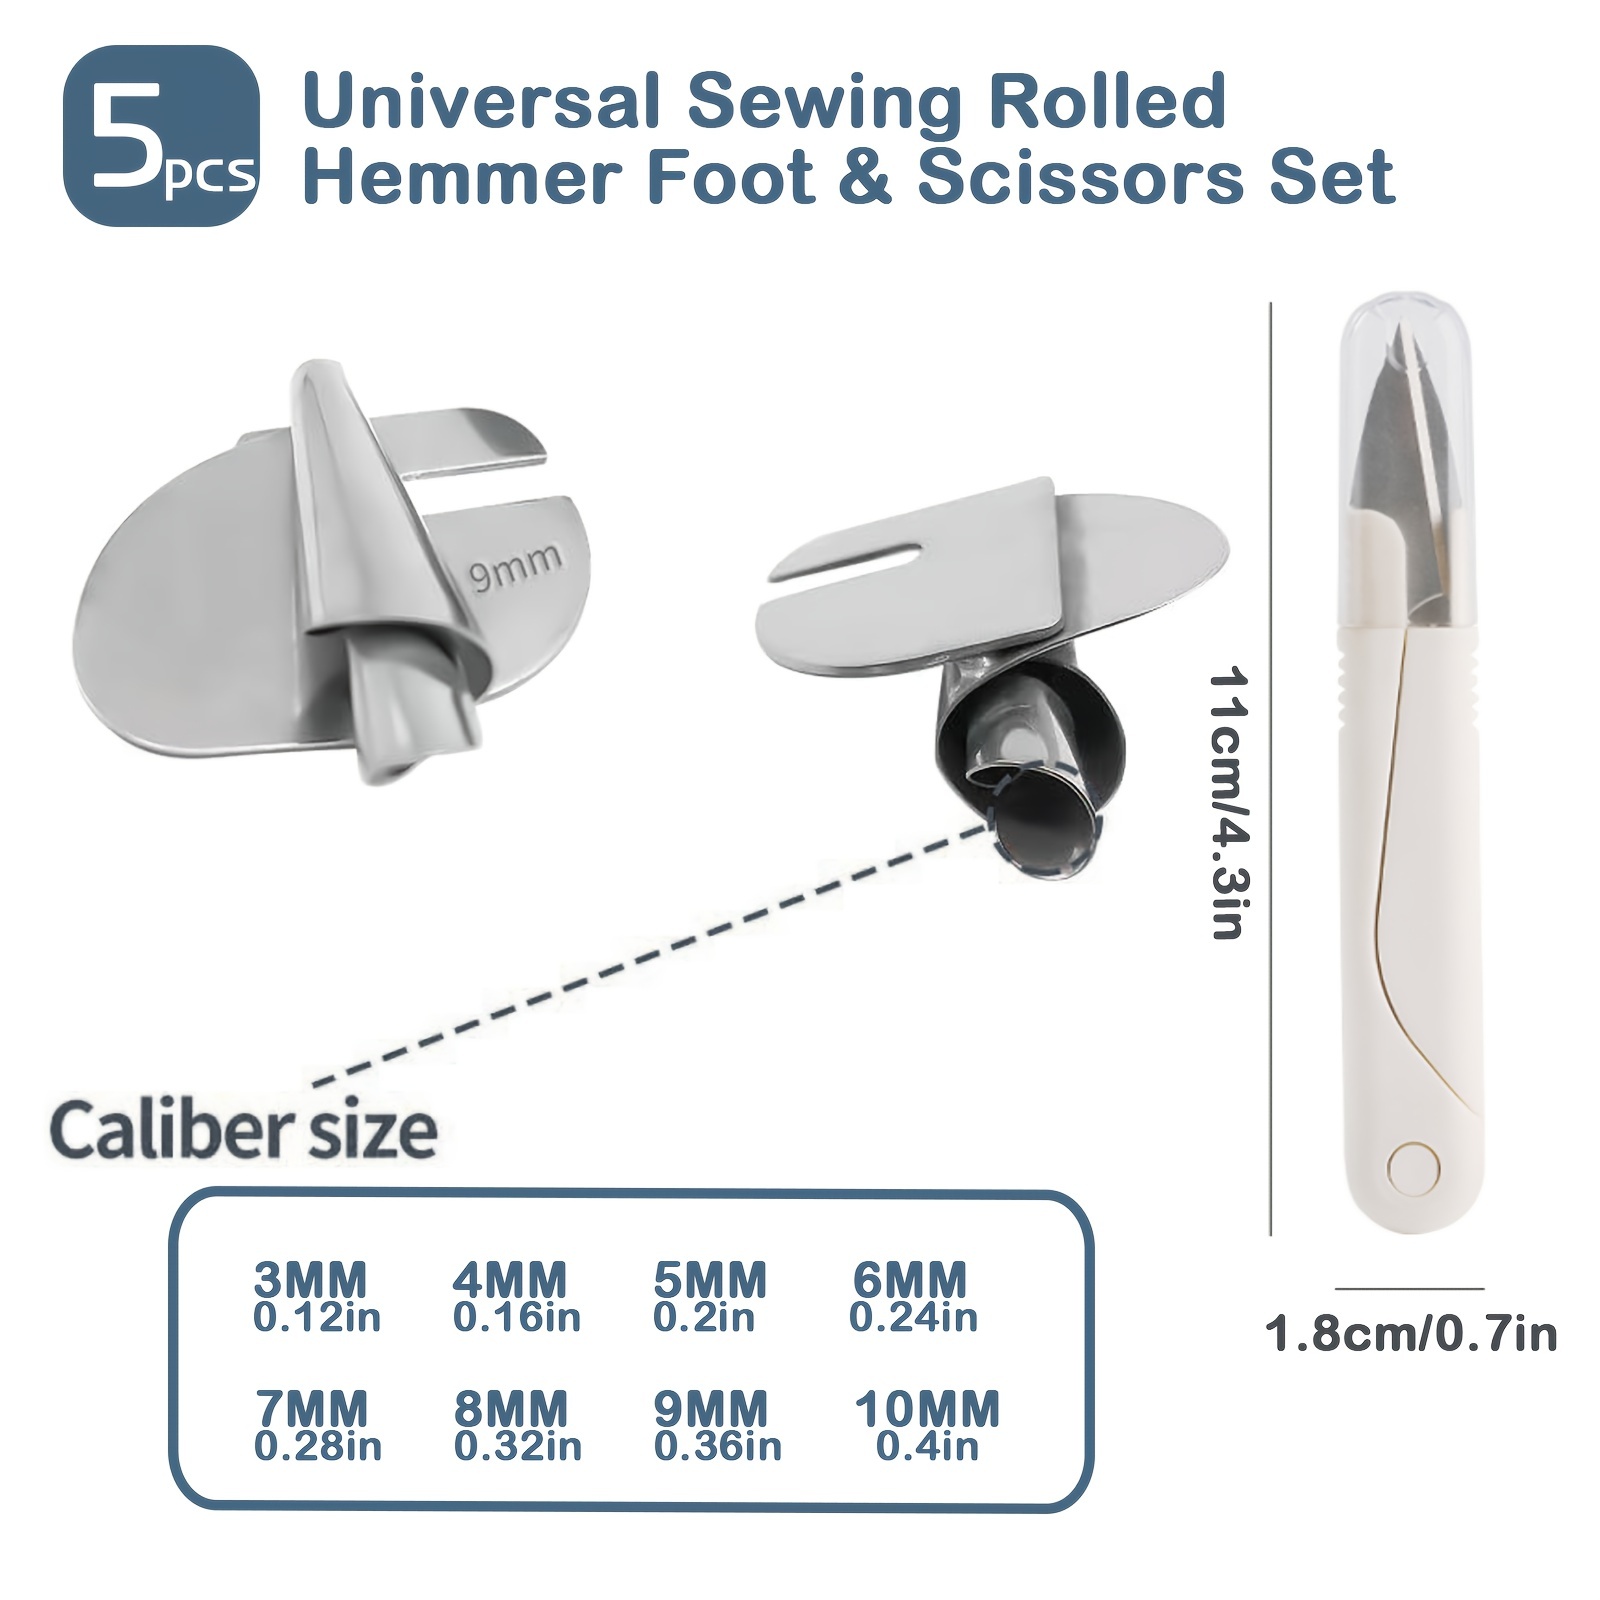  Universal Sewing Rolled Hemmer Foot Set, 8Pcs Rolled Hem  Pressure Foot Home Industrial Curved Scroll Hemmer Foot(4 Sizes: 3/4/5/6mm)